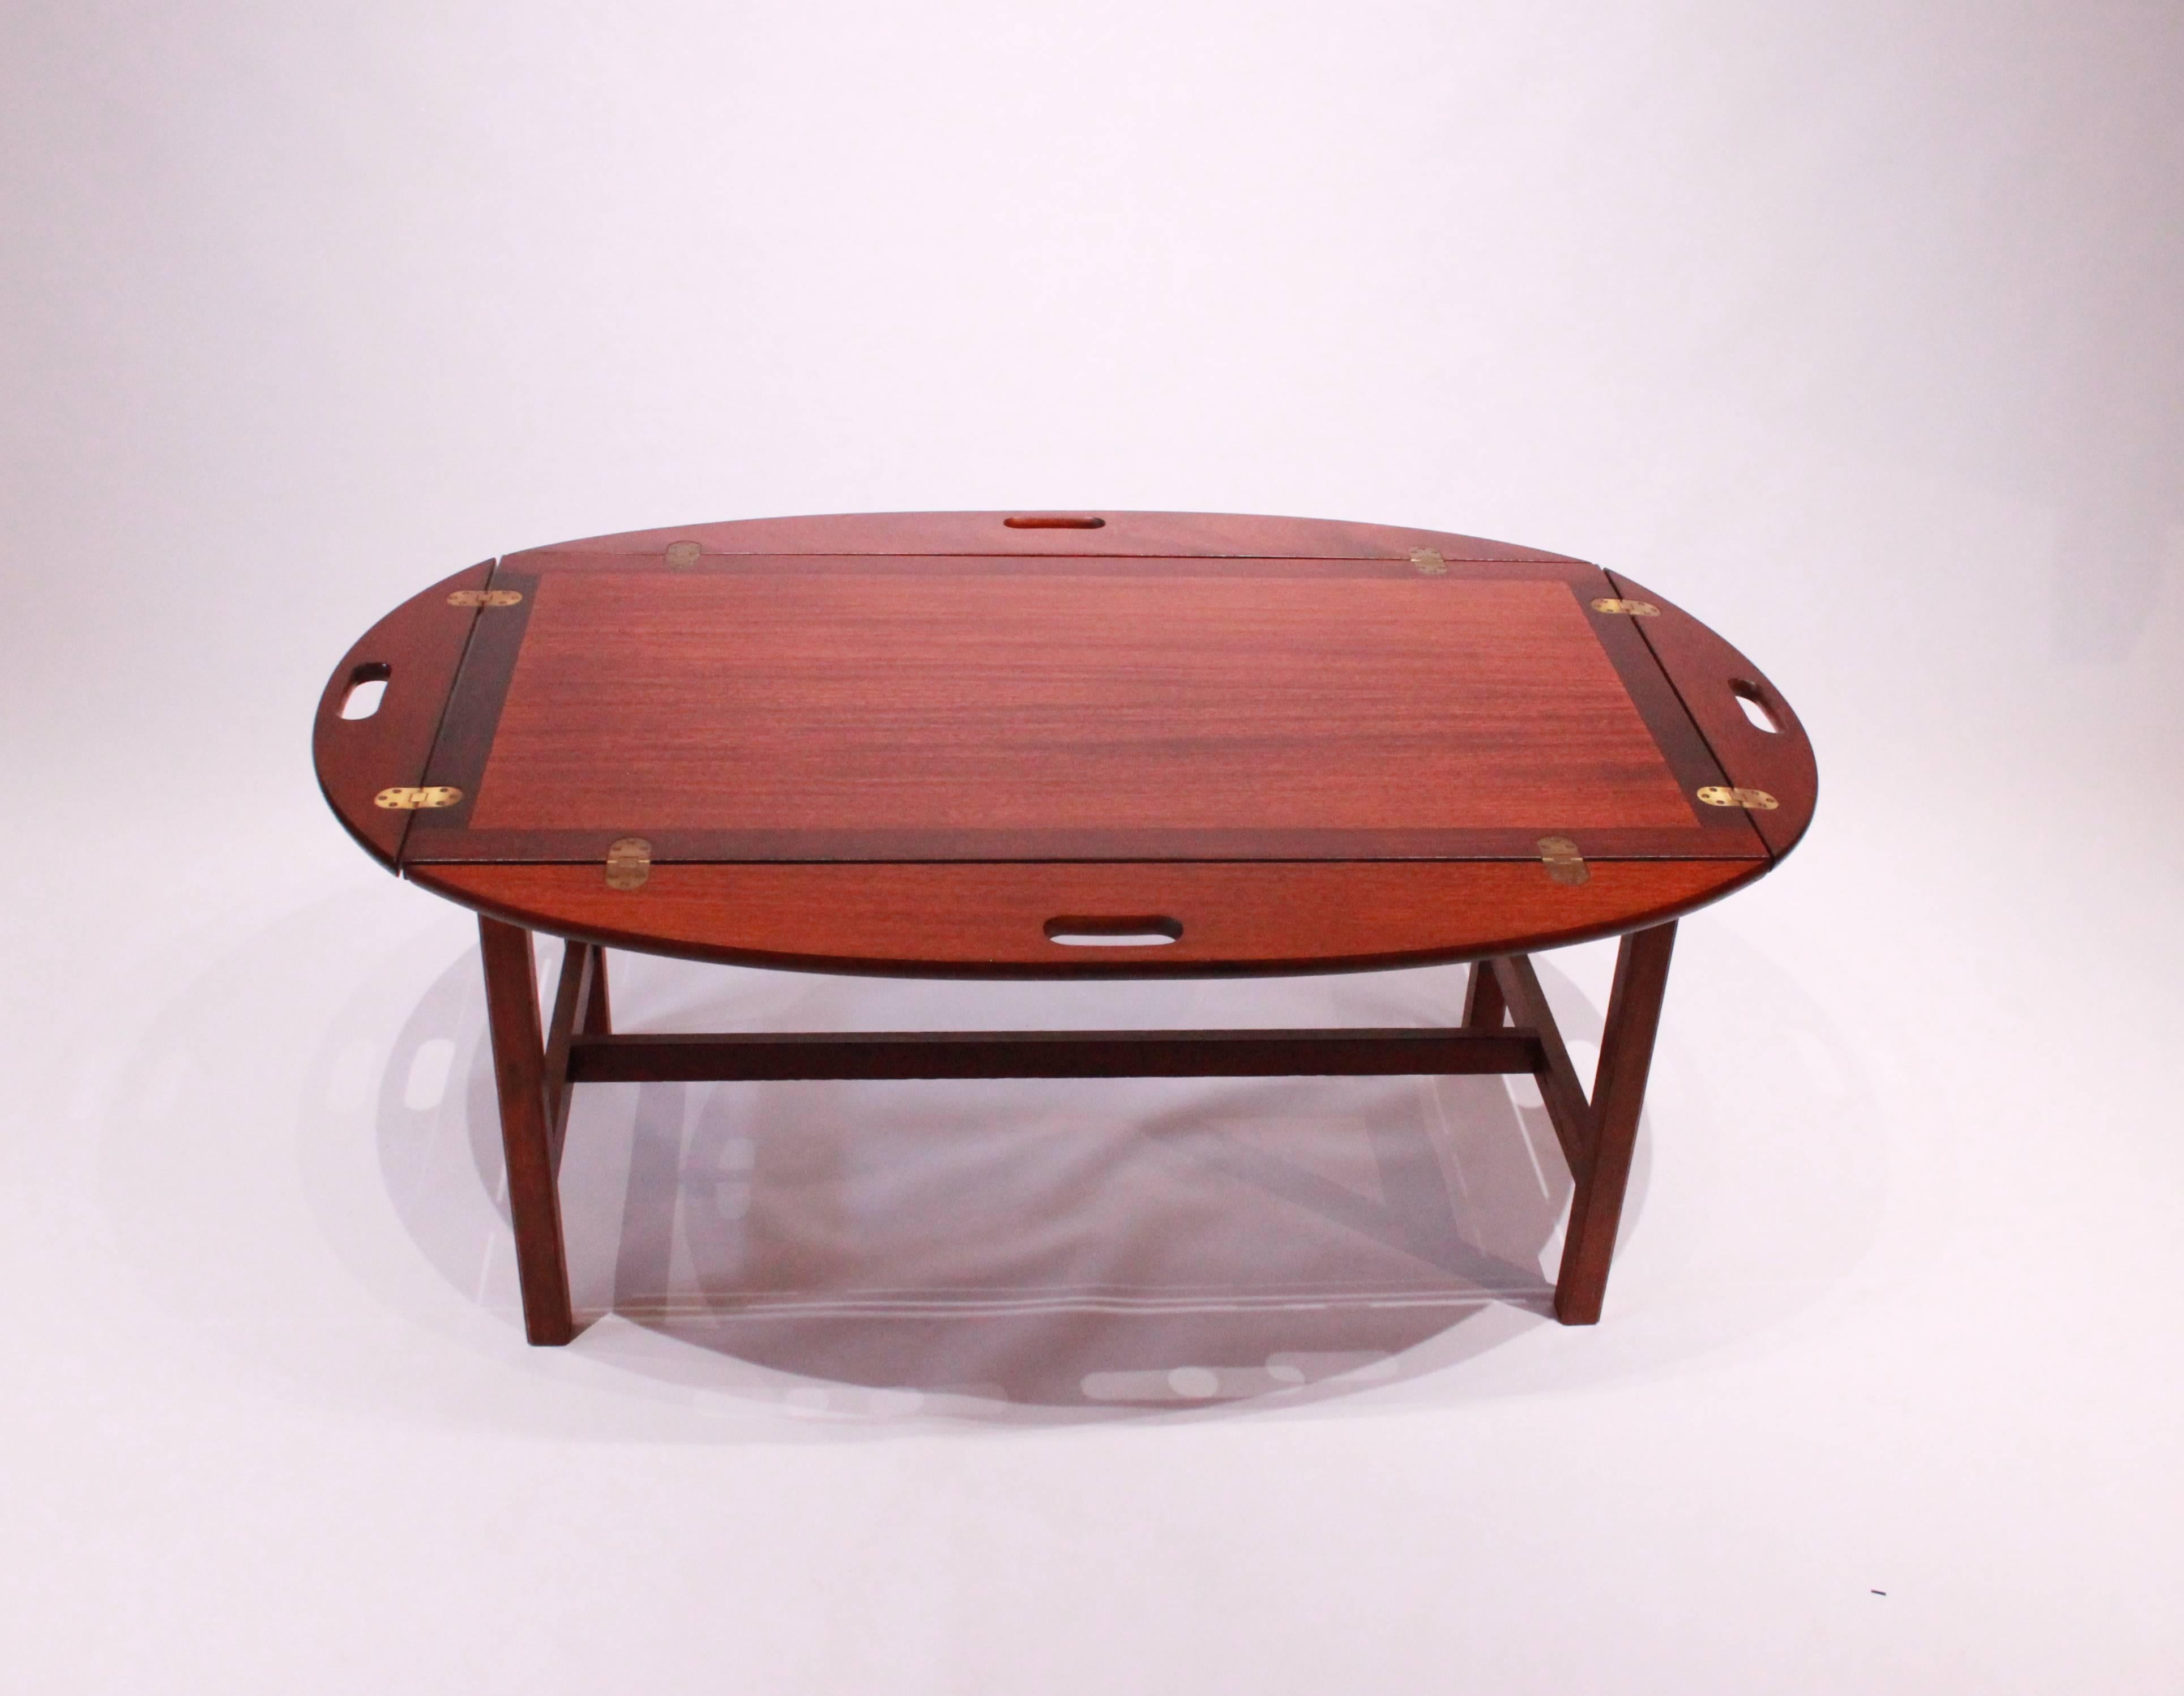 Scandinavian Modern Butler's Tray in Polished Mahogany from the 1960s of Danish Design